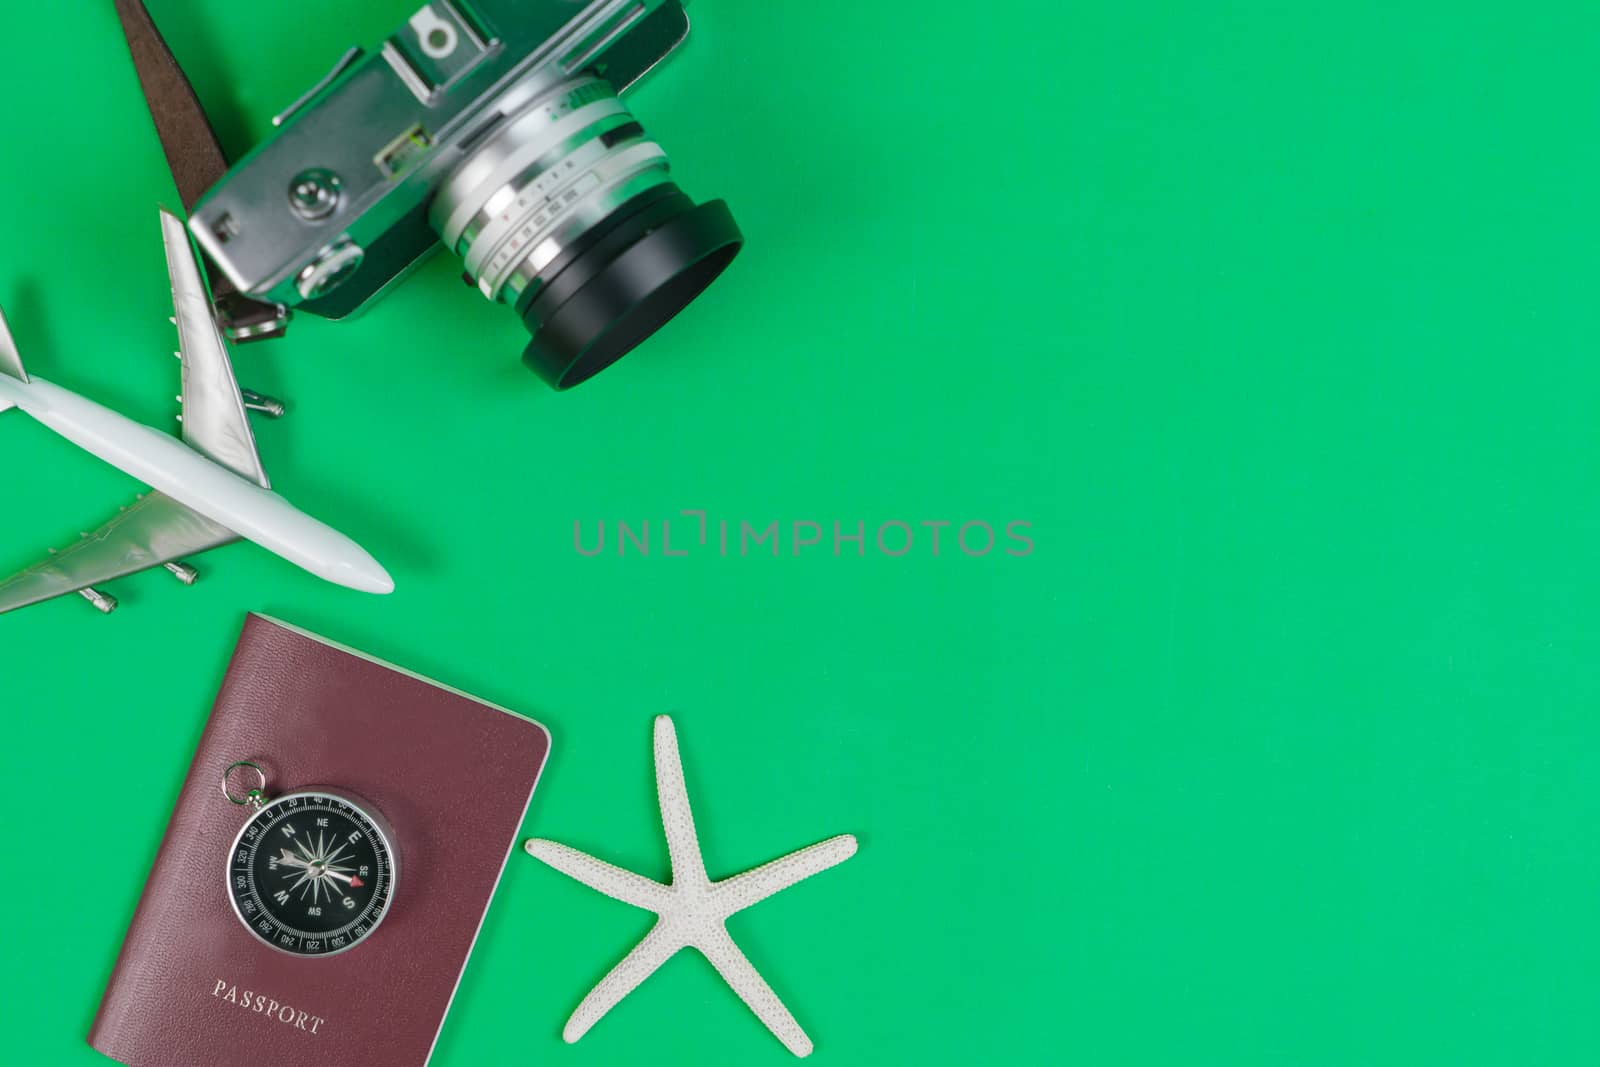 Compass and accessories for travel with copy space